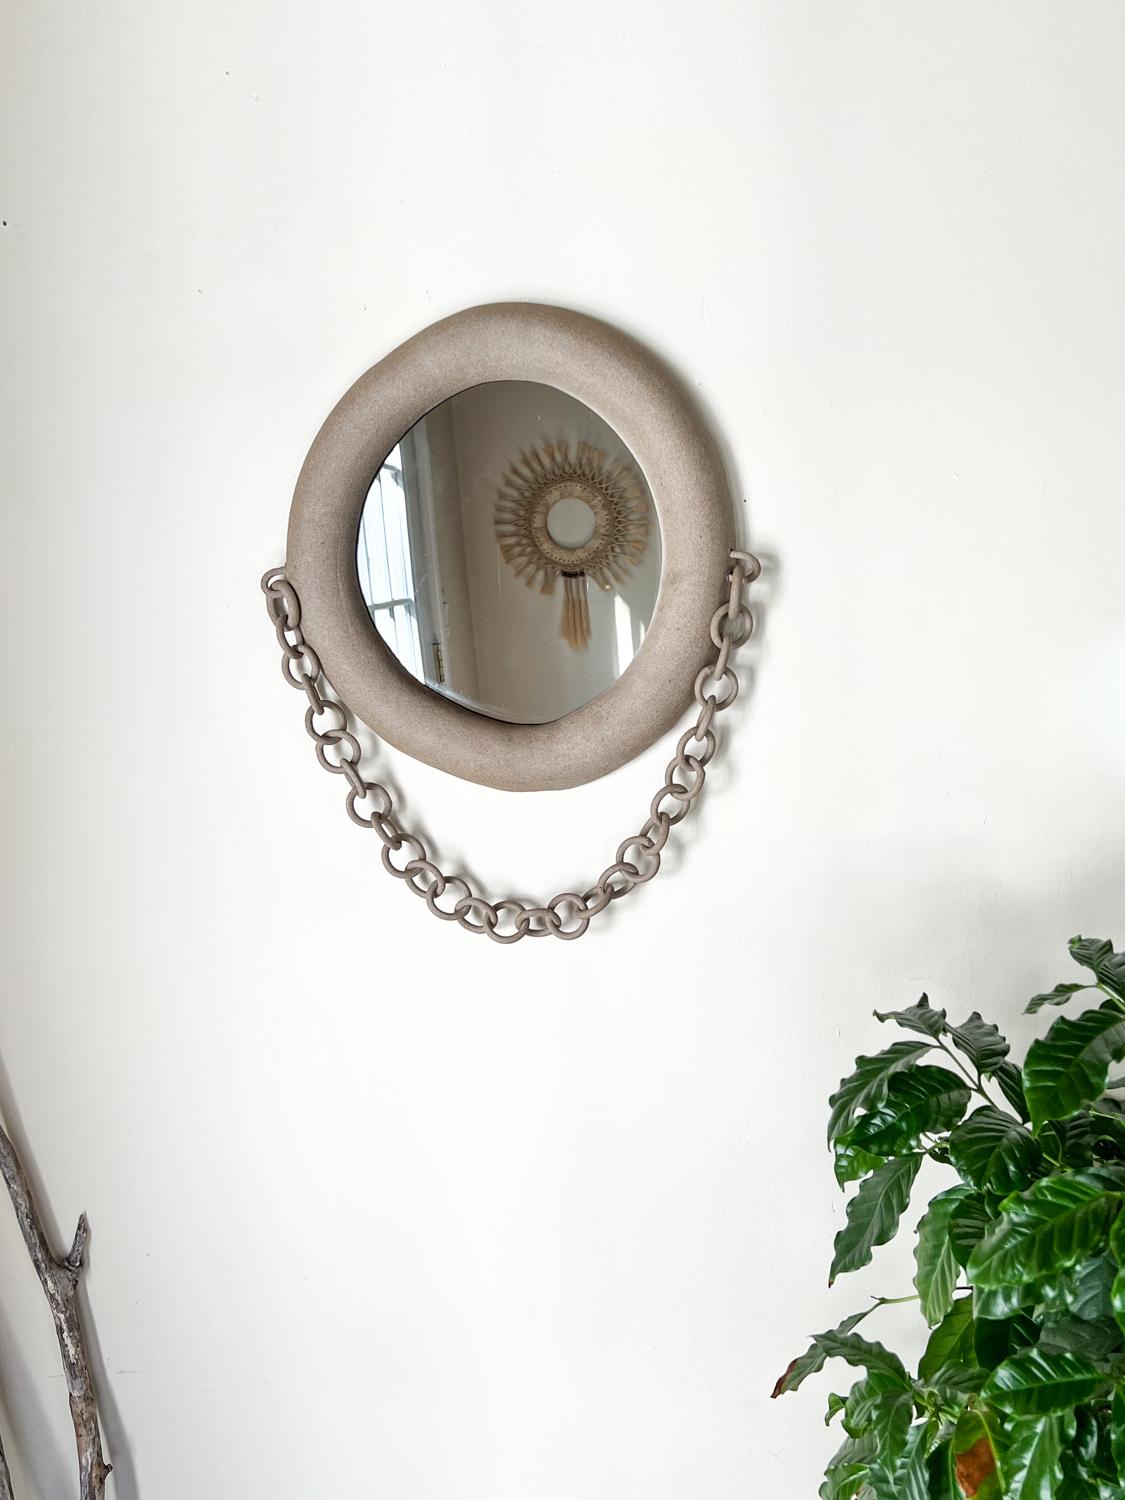 Introducing our exquisite handmade ceramic mirror, crafted with a rustic charm that adds a touch of warmth and character to any space. This one-of-a-kind piece showcases a beautifully textured ceramic frame, meticulously handcrafted to create a